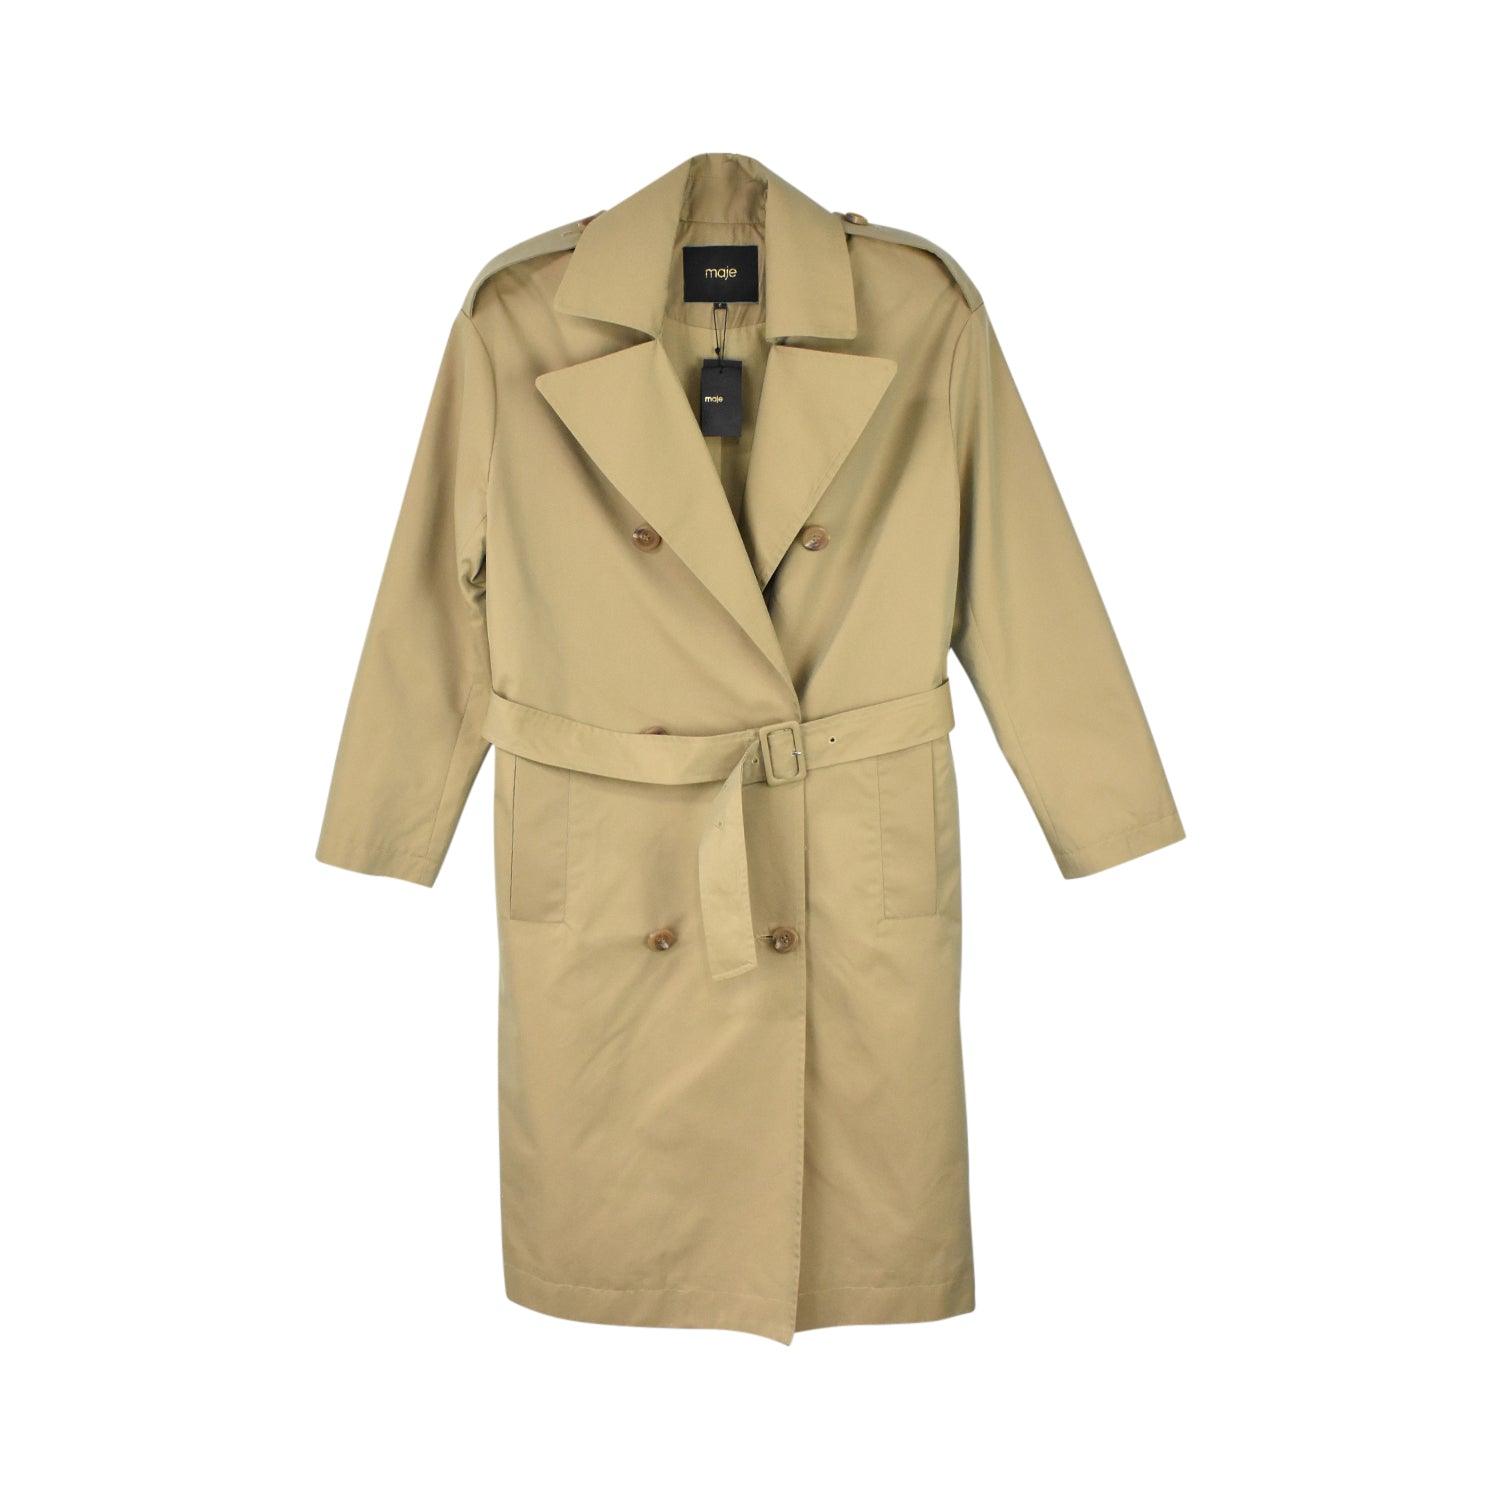 Maje Trench Jacket - Women's 0 - Fashionably Yours